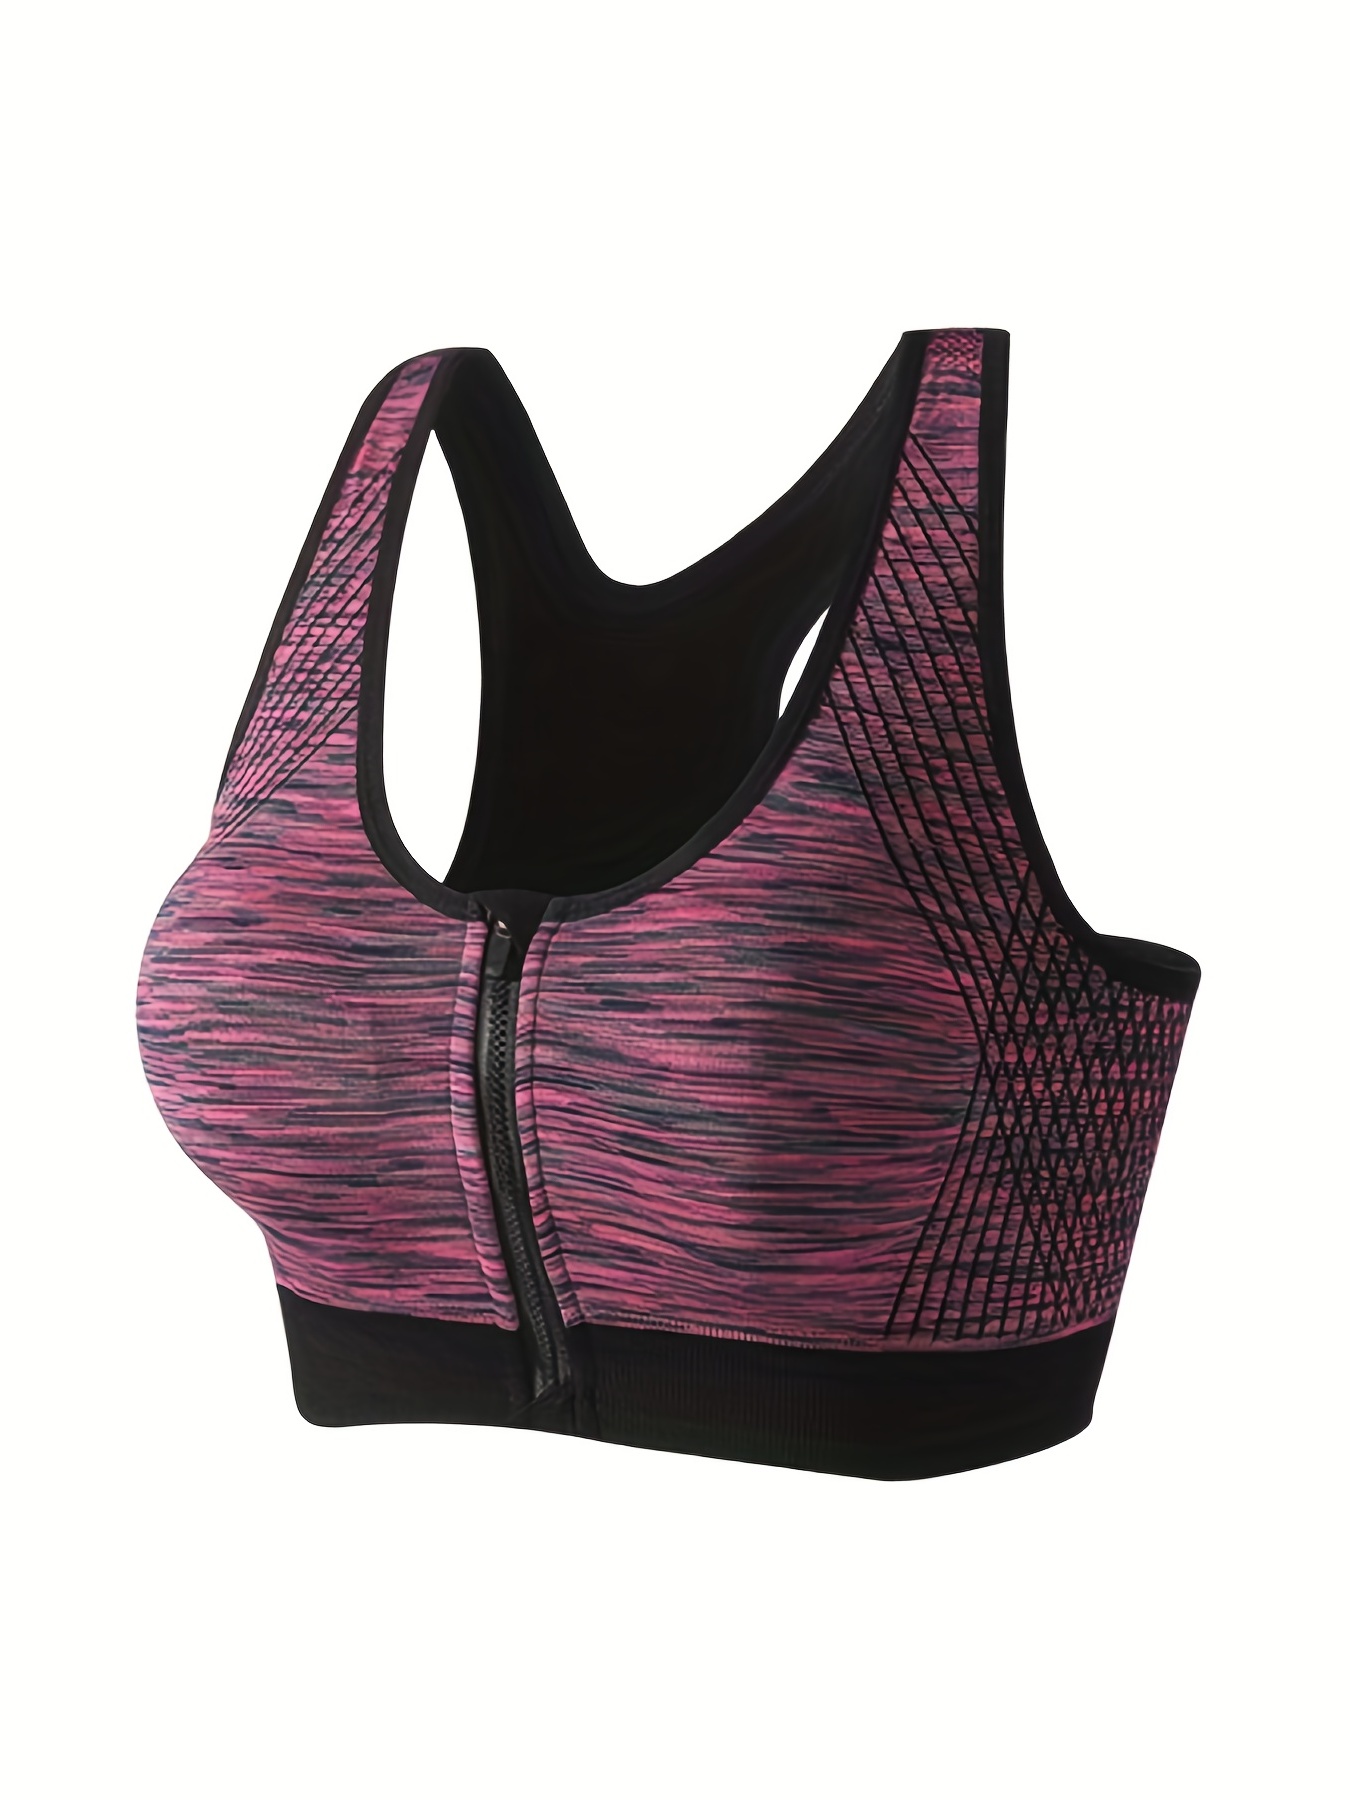 Vitality Activate Zip Bra - Women's Black Sports Bra with Lime Contrast